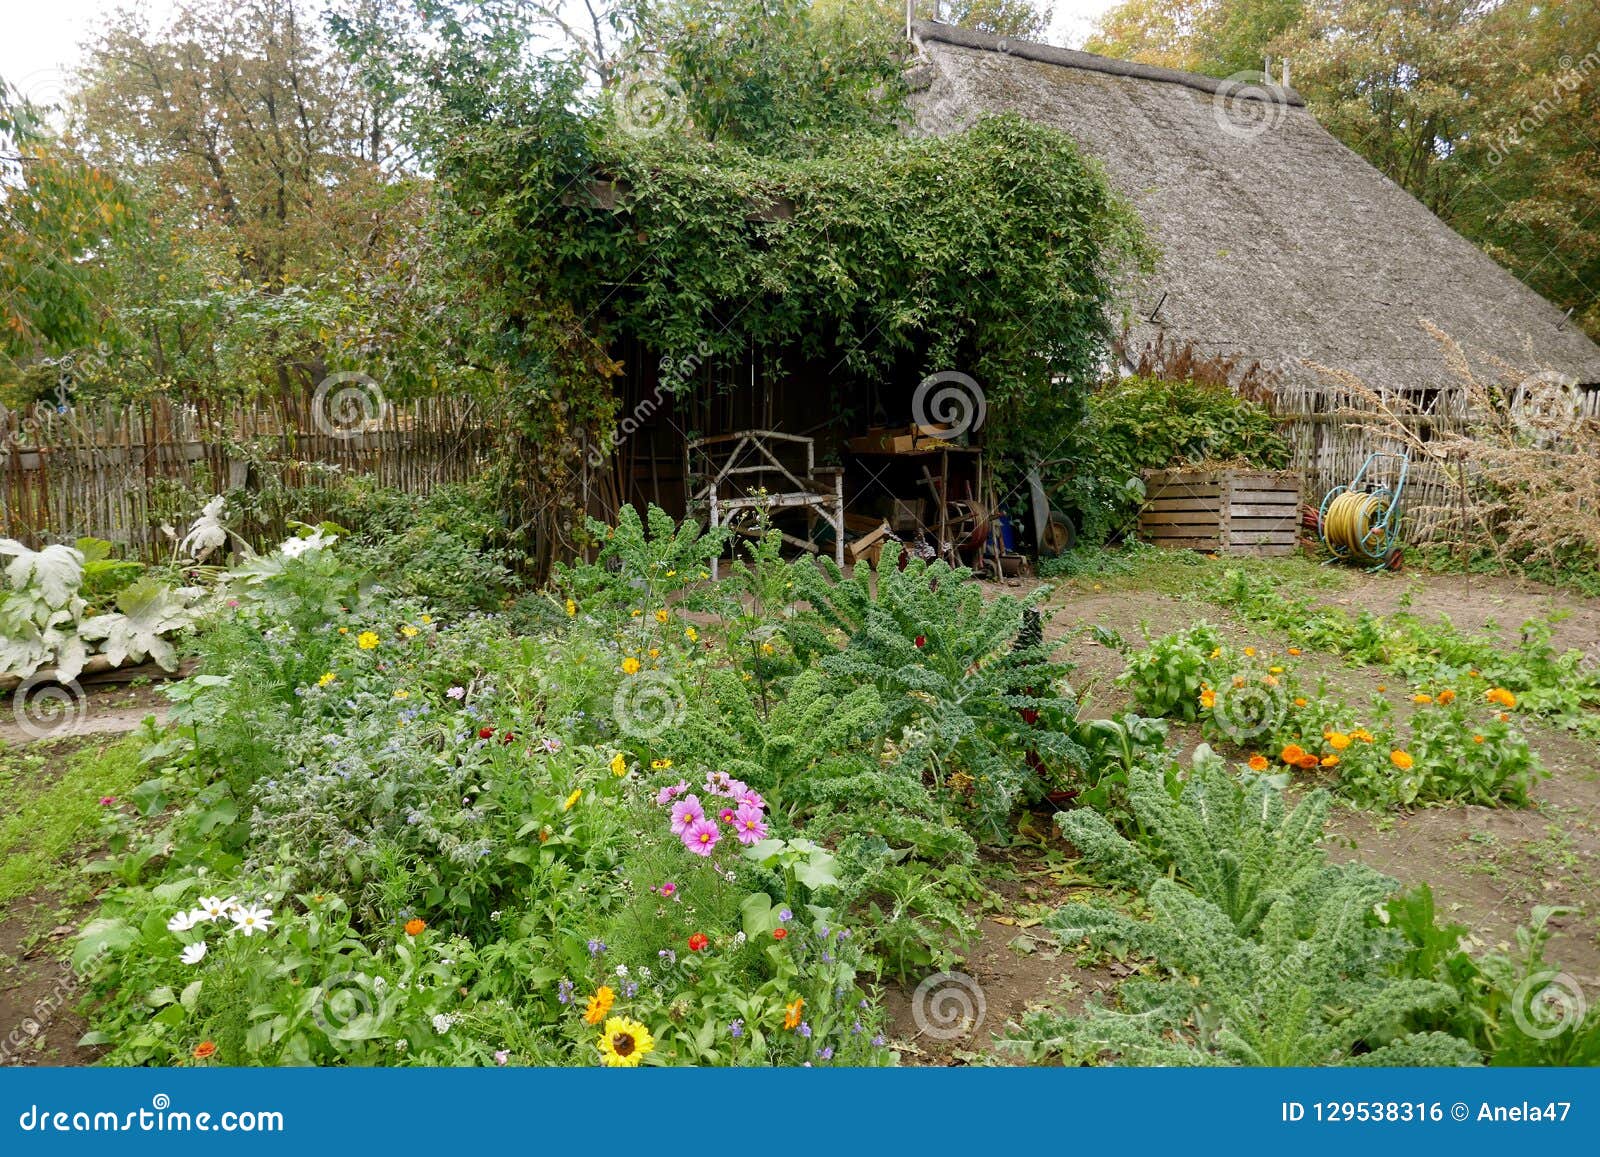 Old Cottage Garden With A Self Made Wooden Bench Stock Photo